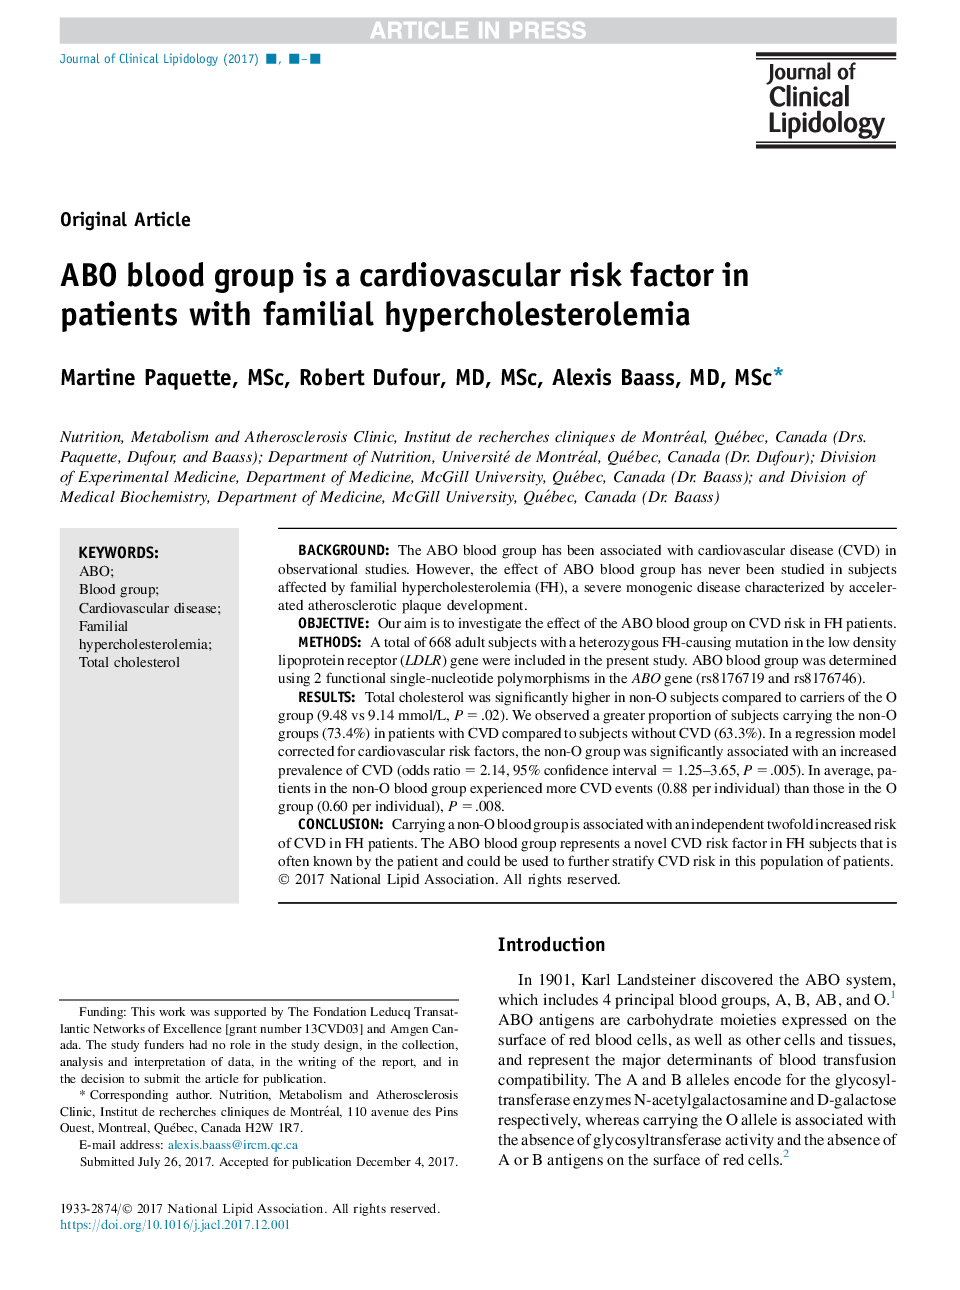 ABO blood group is a cardiovascular risk factor in patients with familial hypercholesterolemia